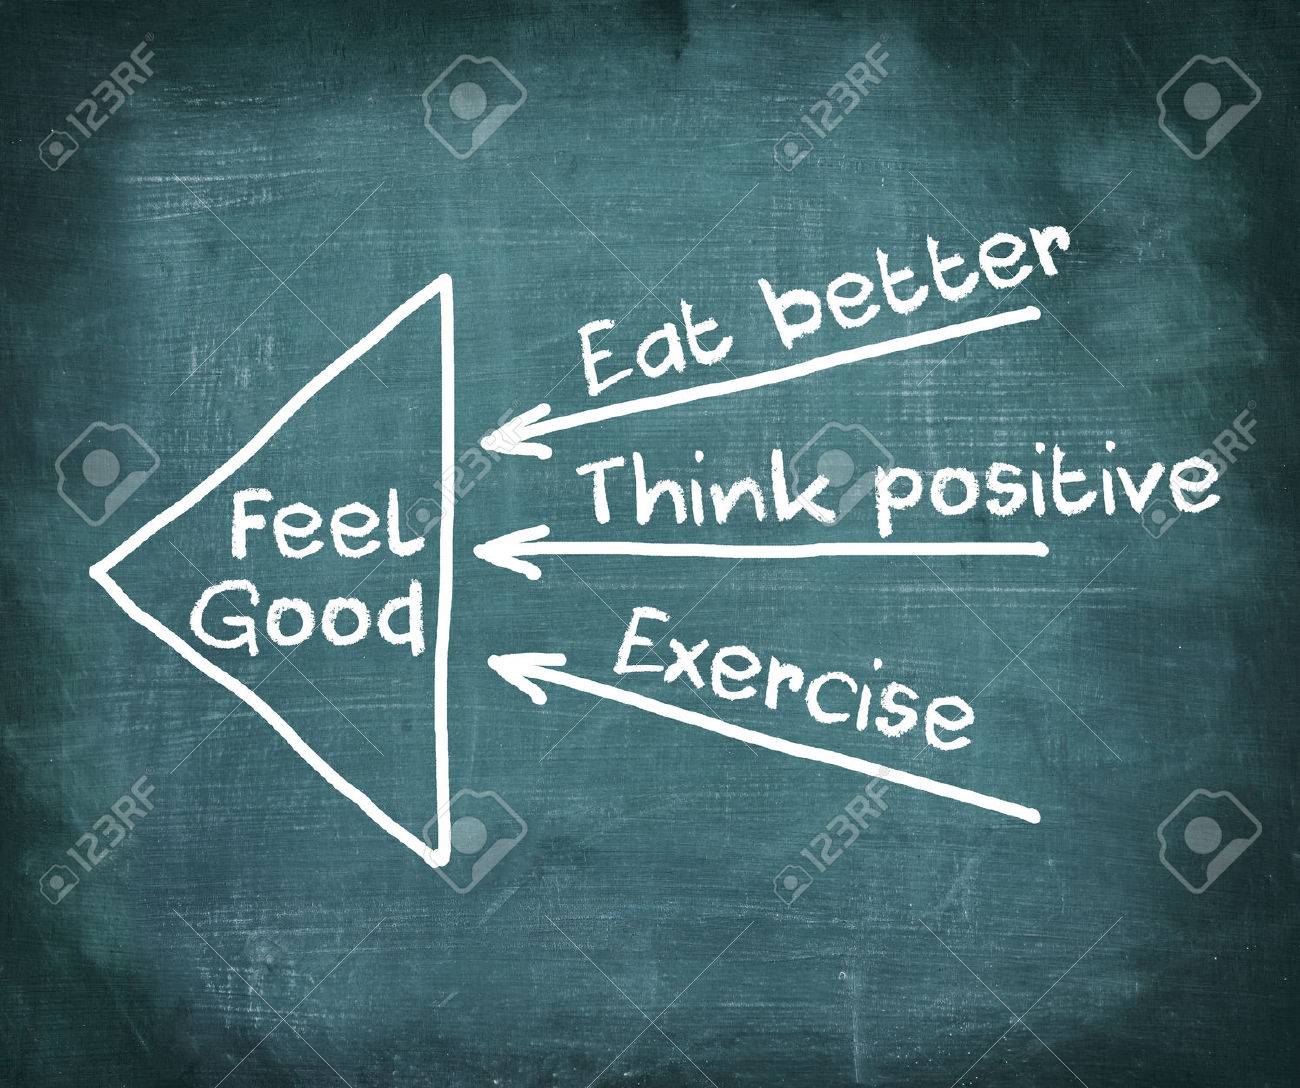 31274901-positive-thinking-eexercise-eat-better-concept-of-feeling-good-drawing-with-white-chalk-on-blackboar.jpg